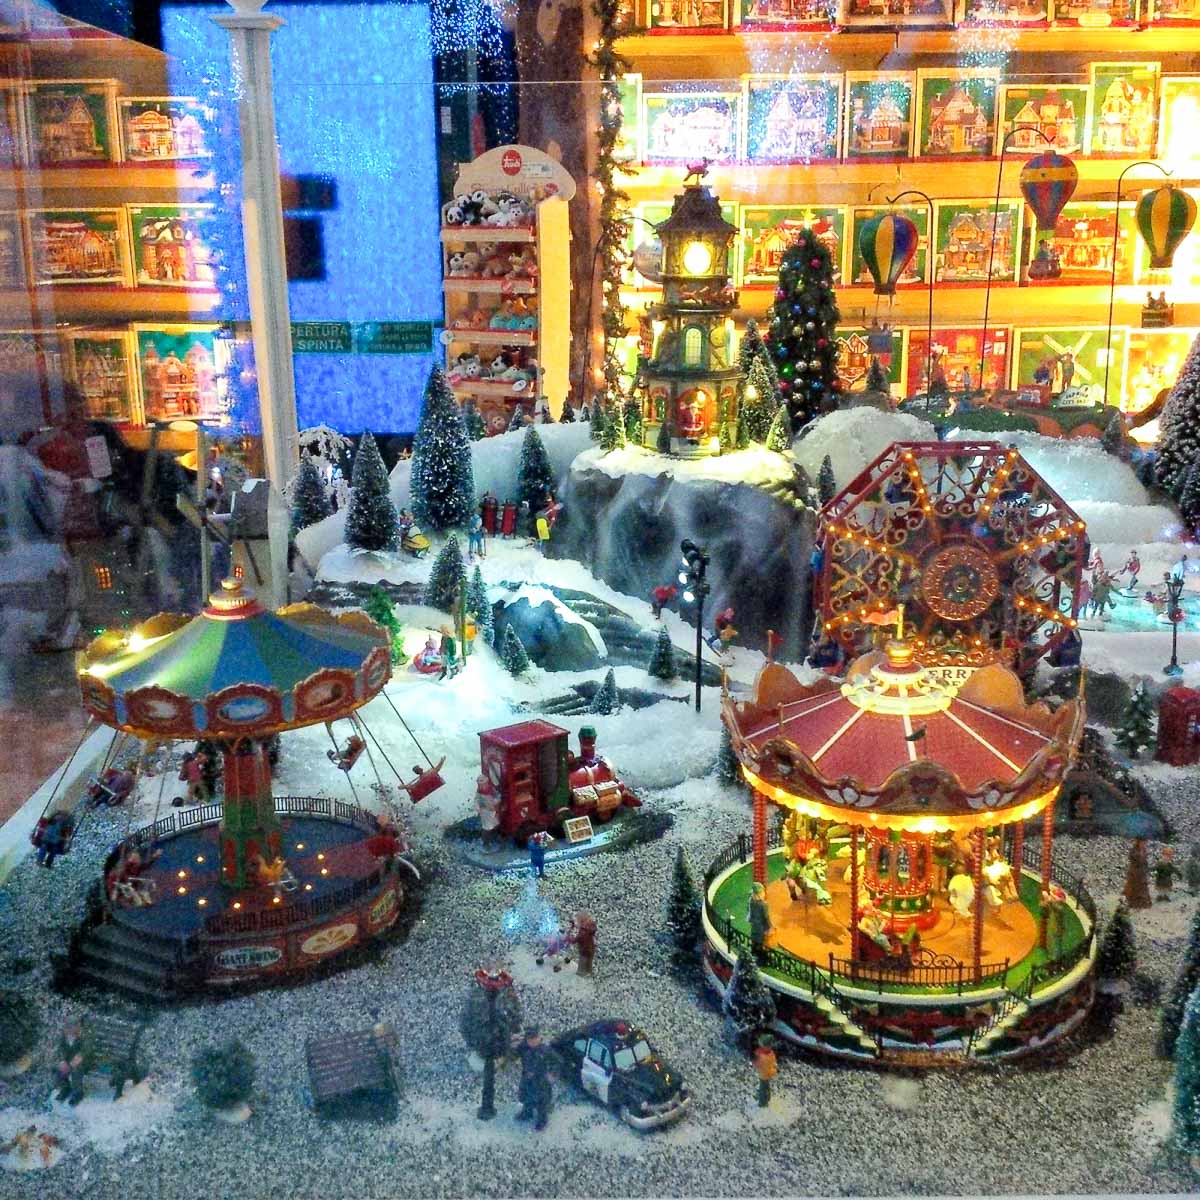 A display of battery-operated Christmas toys in a shop - Vicenza, Italy - rossiwrites.com